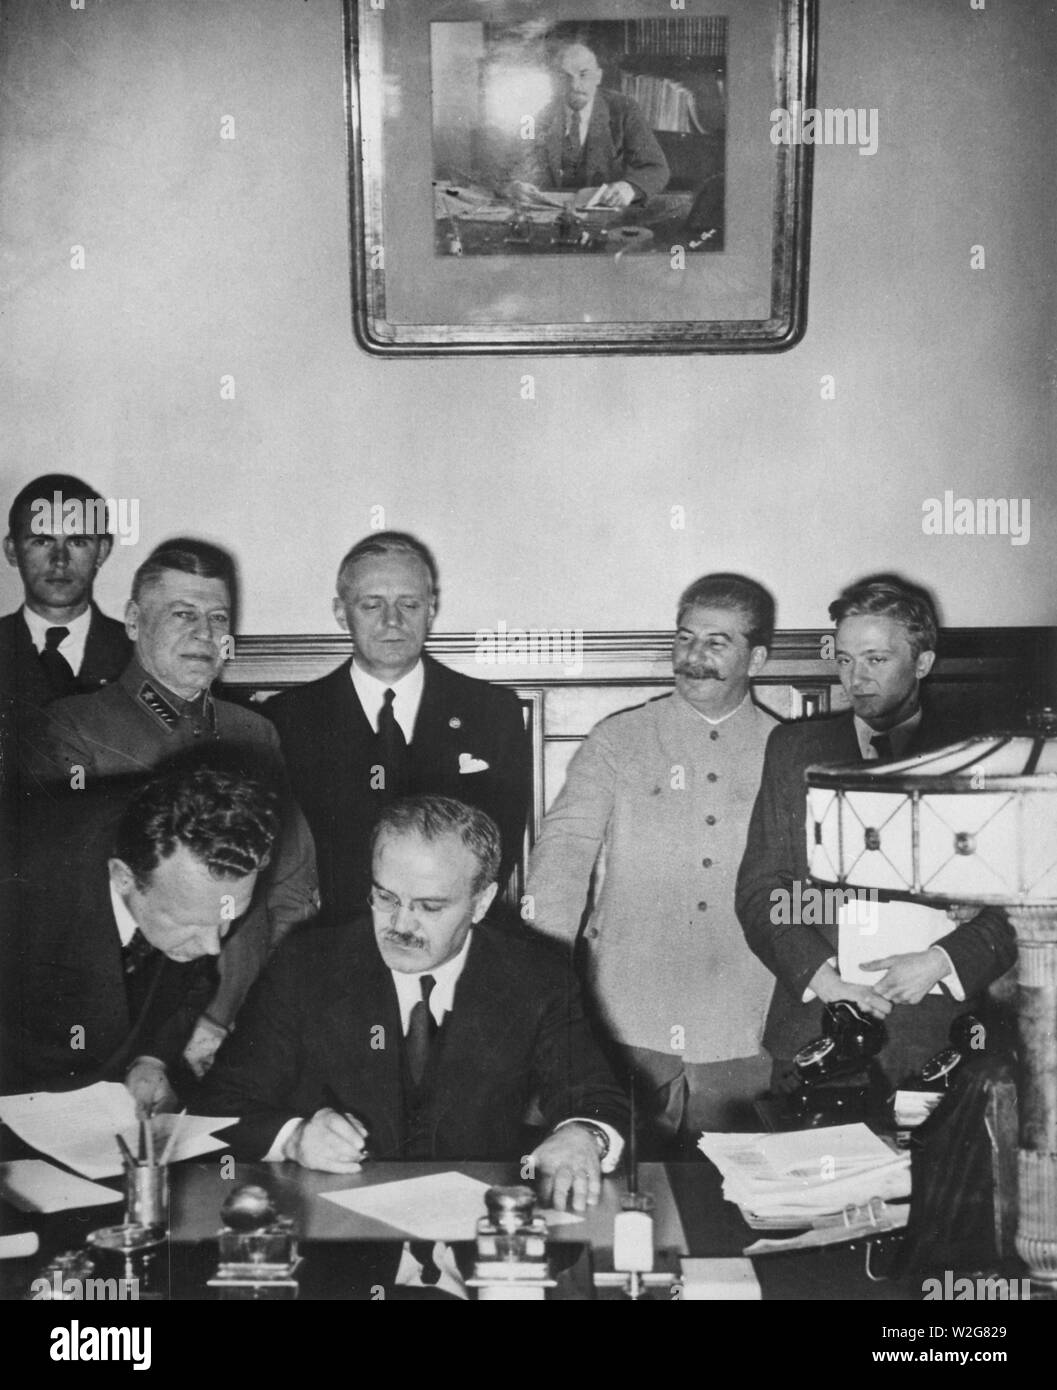 Treaty of Non-Aggression between Germany and the Union of Soviet Socialist Republics,  Moscow, August 23, 1939. Soviet Foreign Minister Vyacheslav Molotov signs. Stock Photo